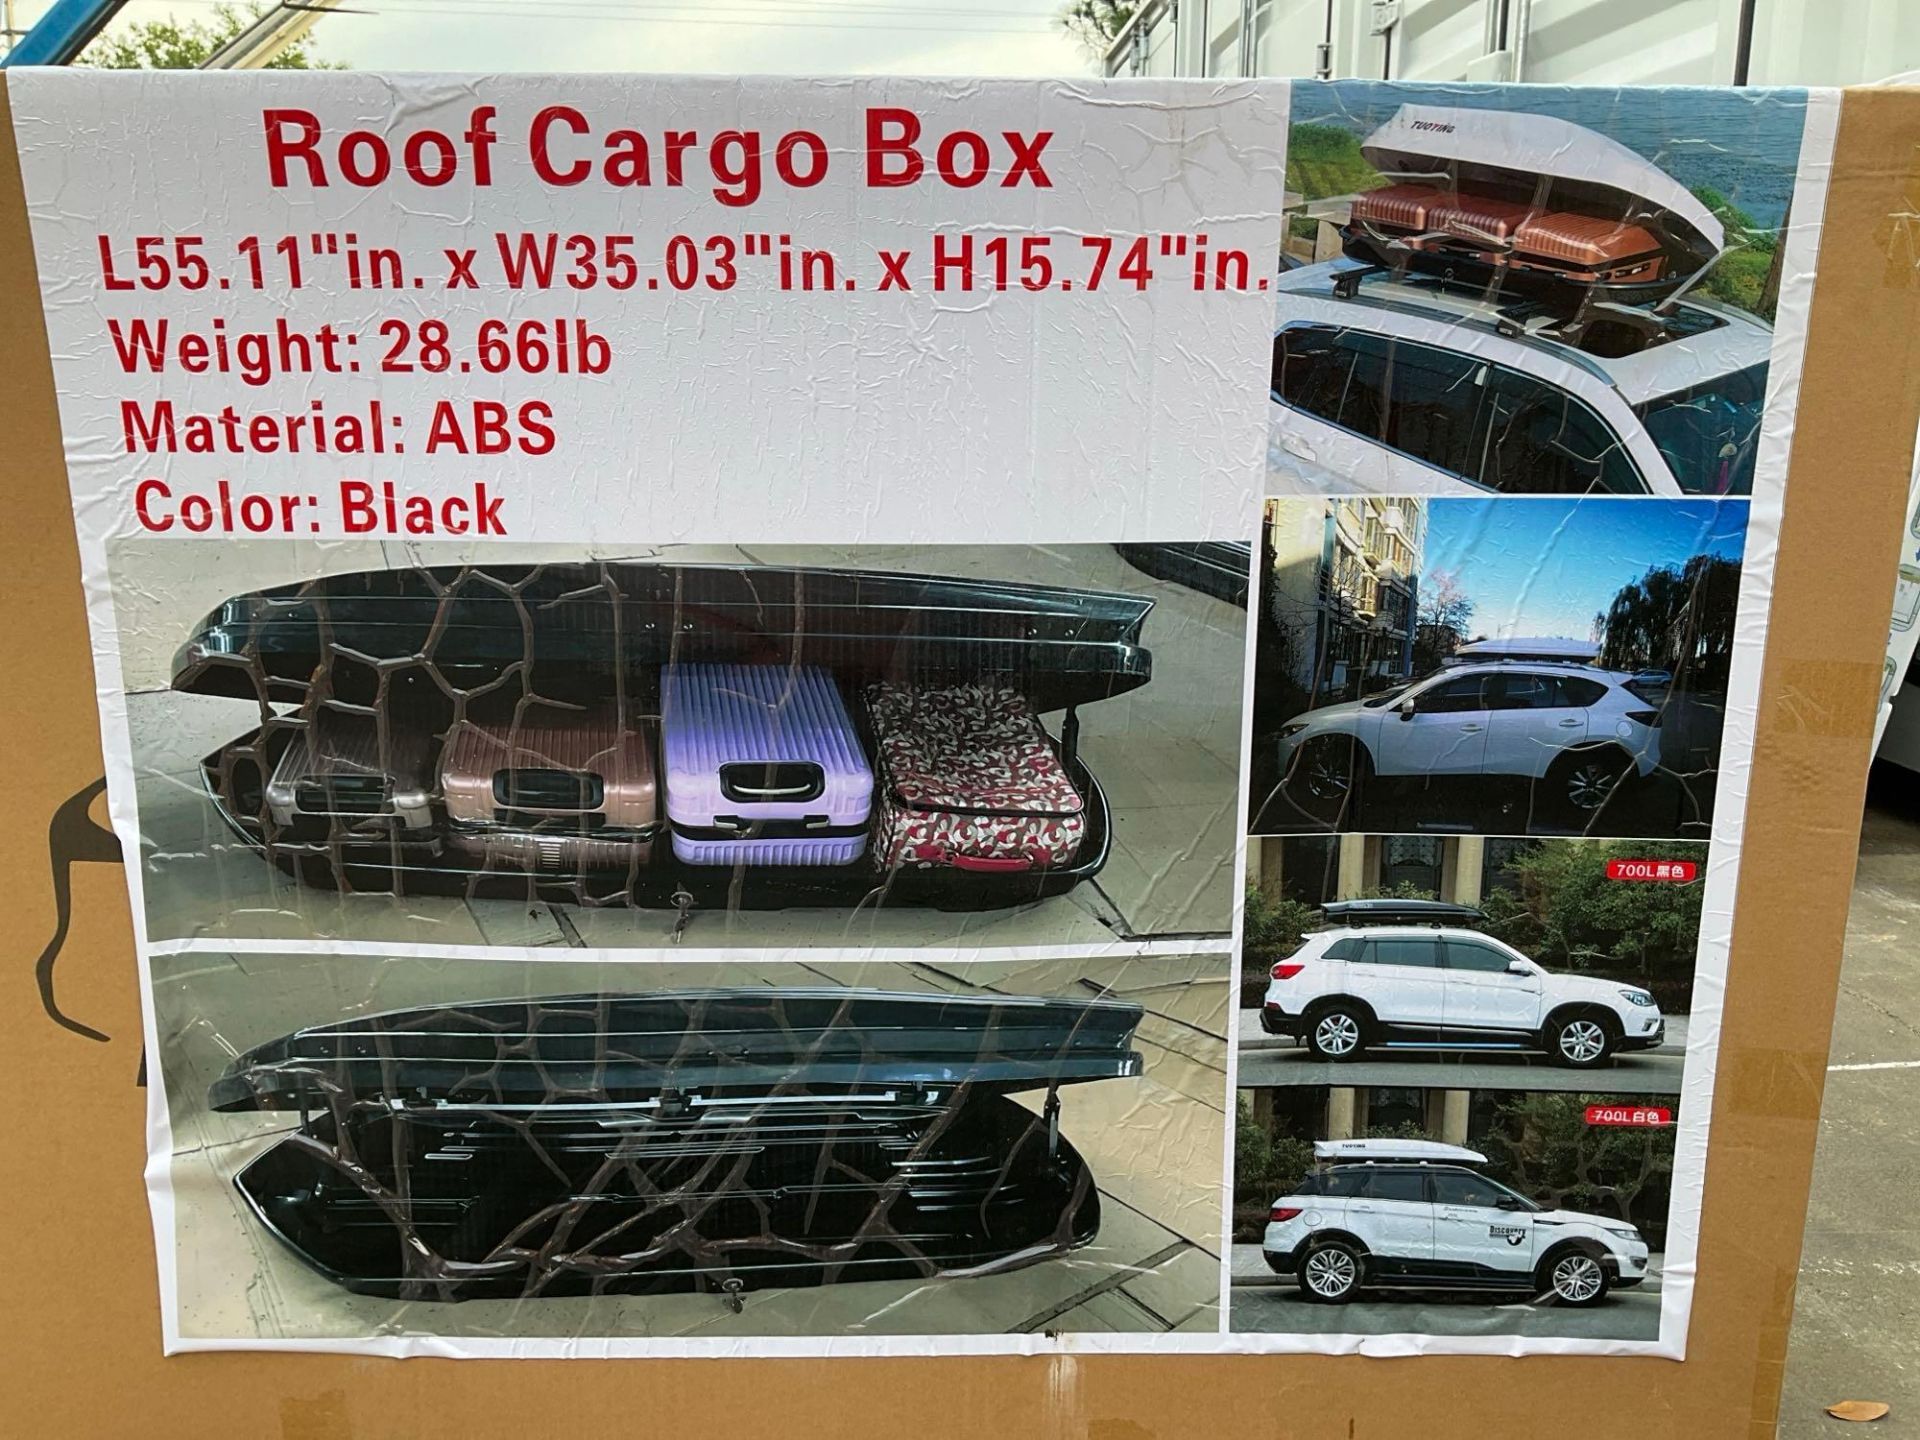 UNUSED ROOF CARGO BOX, APPROX 55.11" L x 35.03" W X 15.74" T, APPROX 1 IN BOX - Image 6 of 6